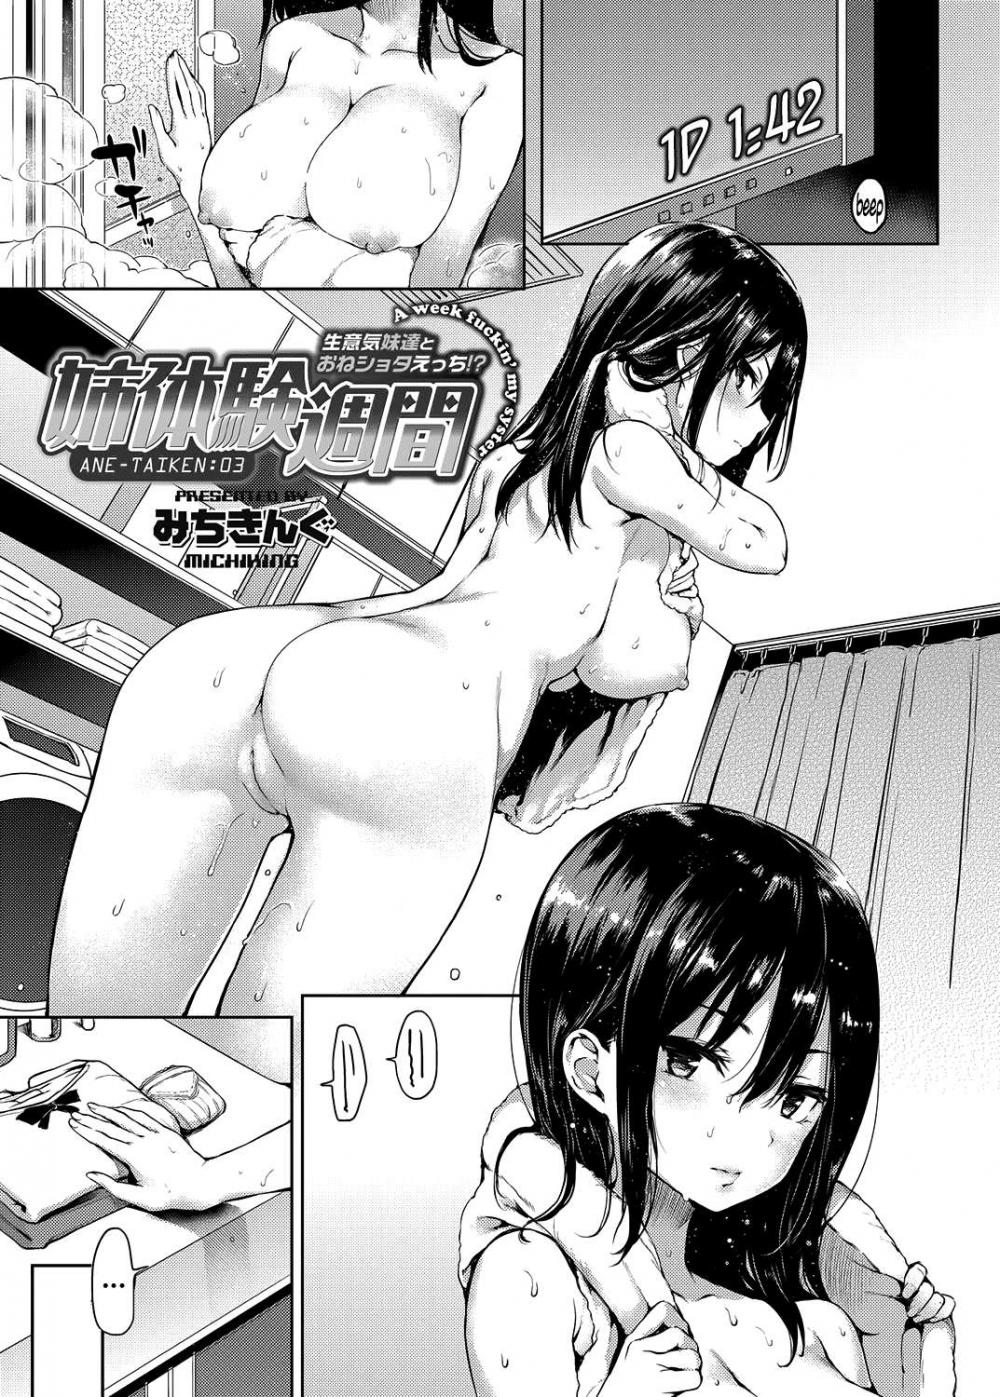 Hentai Manga Comic-The Older Sister Experience for a Week-Chapter 3-1